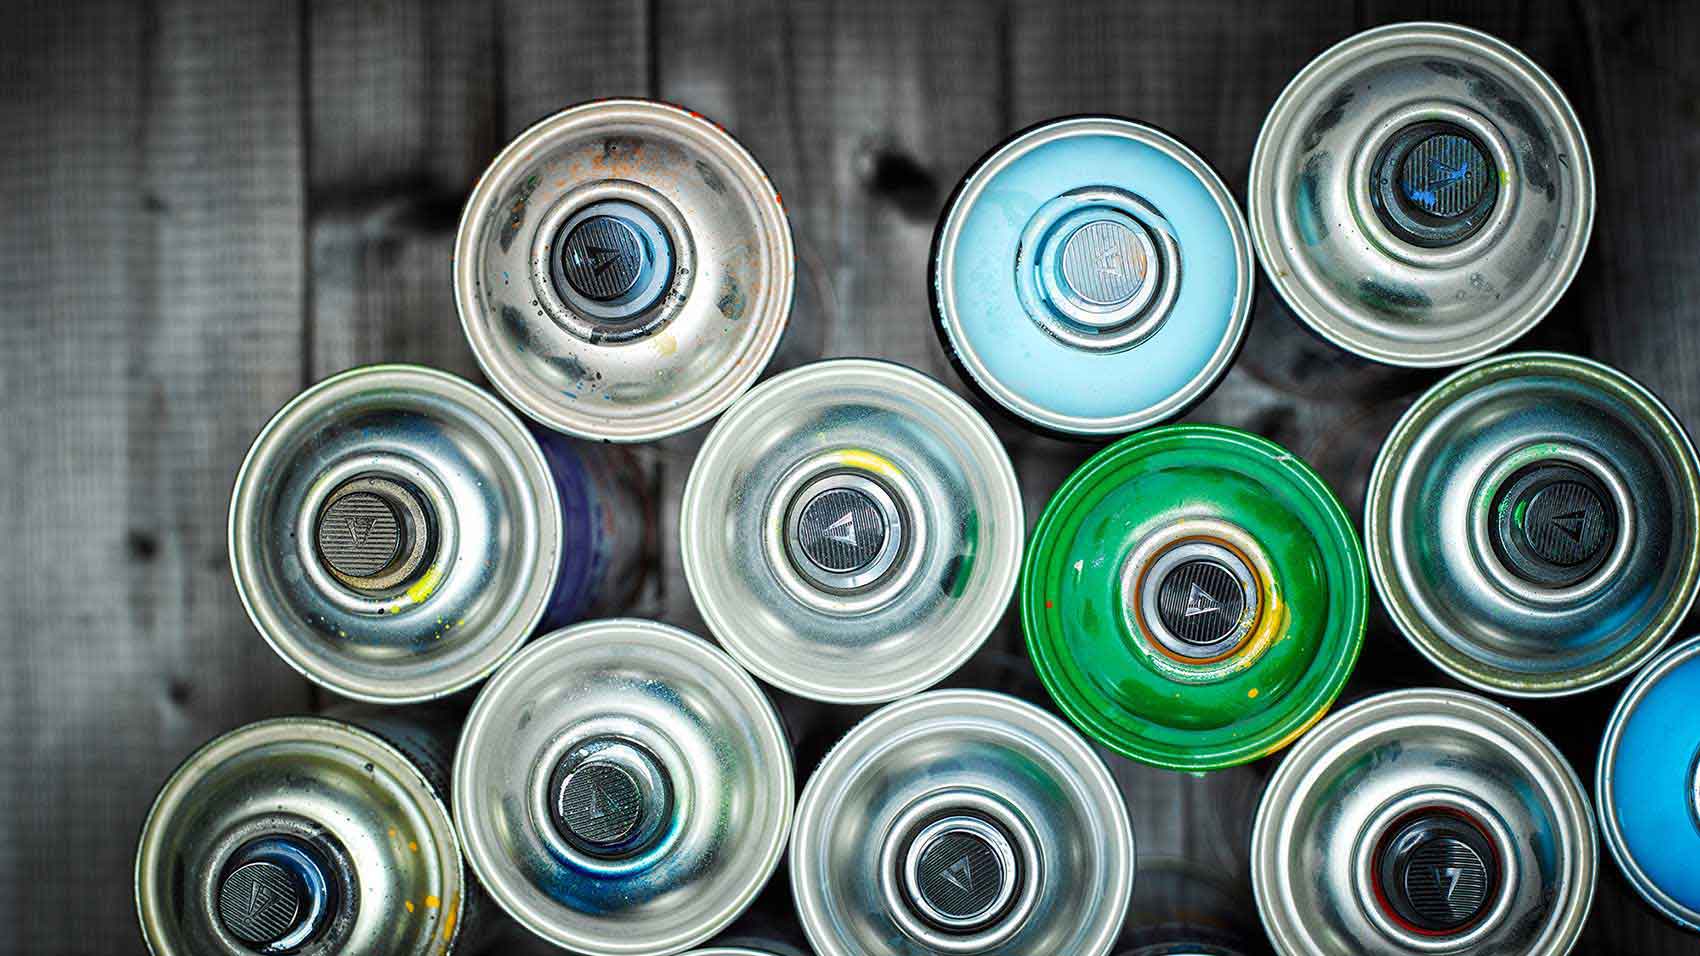 SC Johnson's product recycling programme helped waste workers sort recycling and separate aerosol cans from other materials.